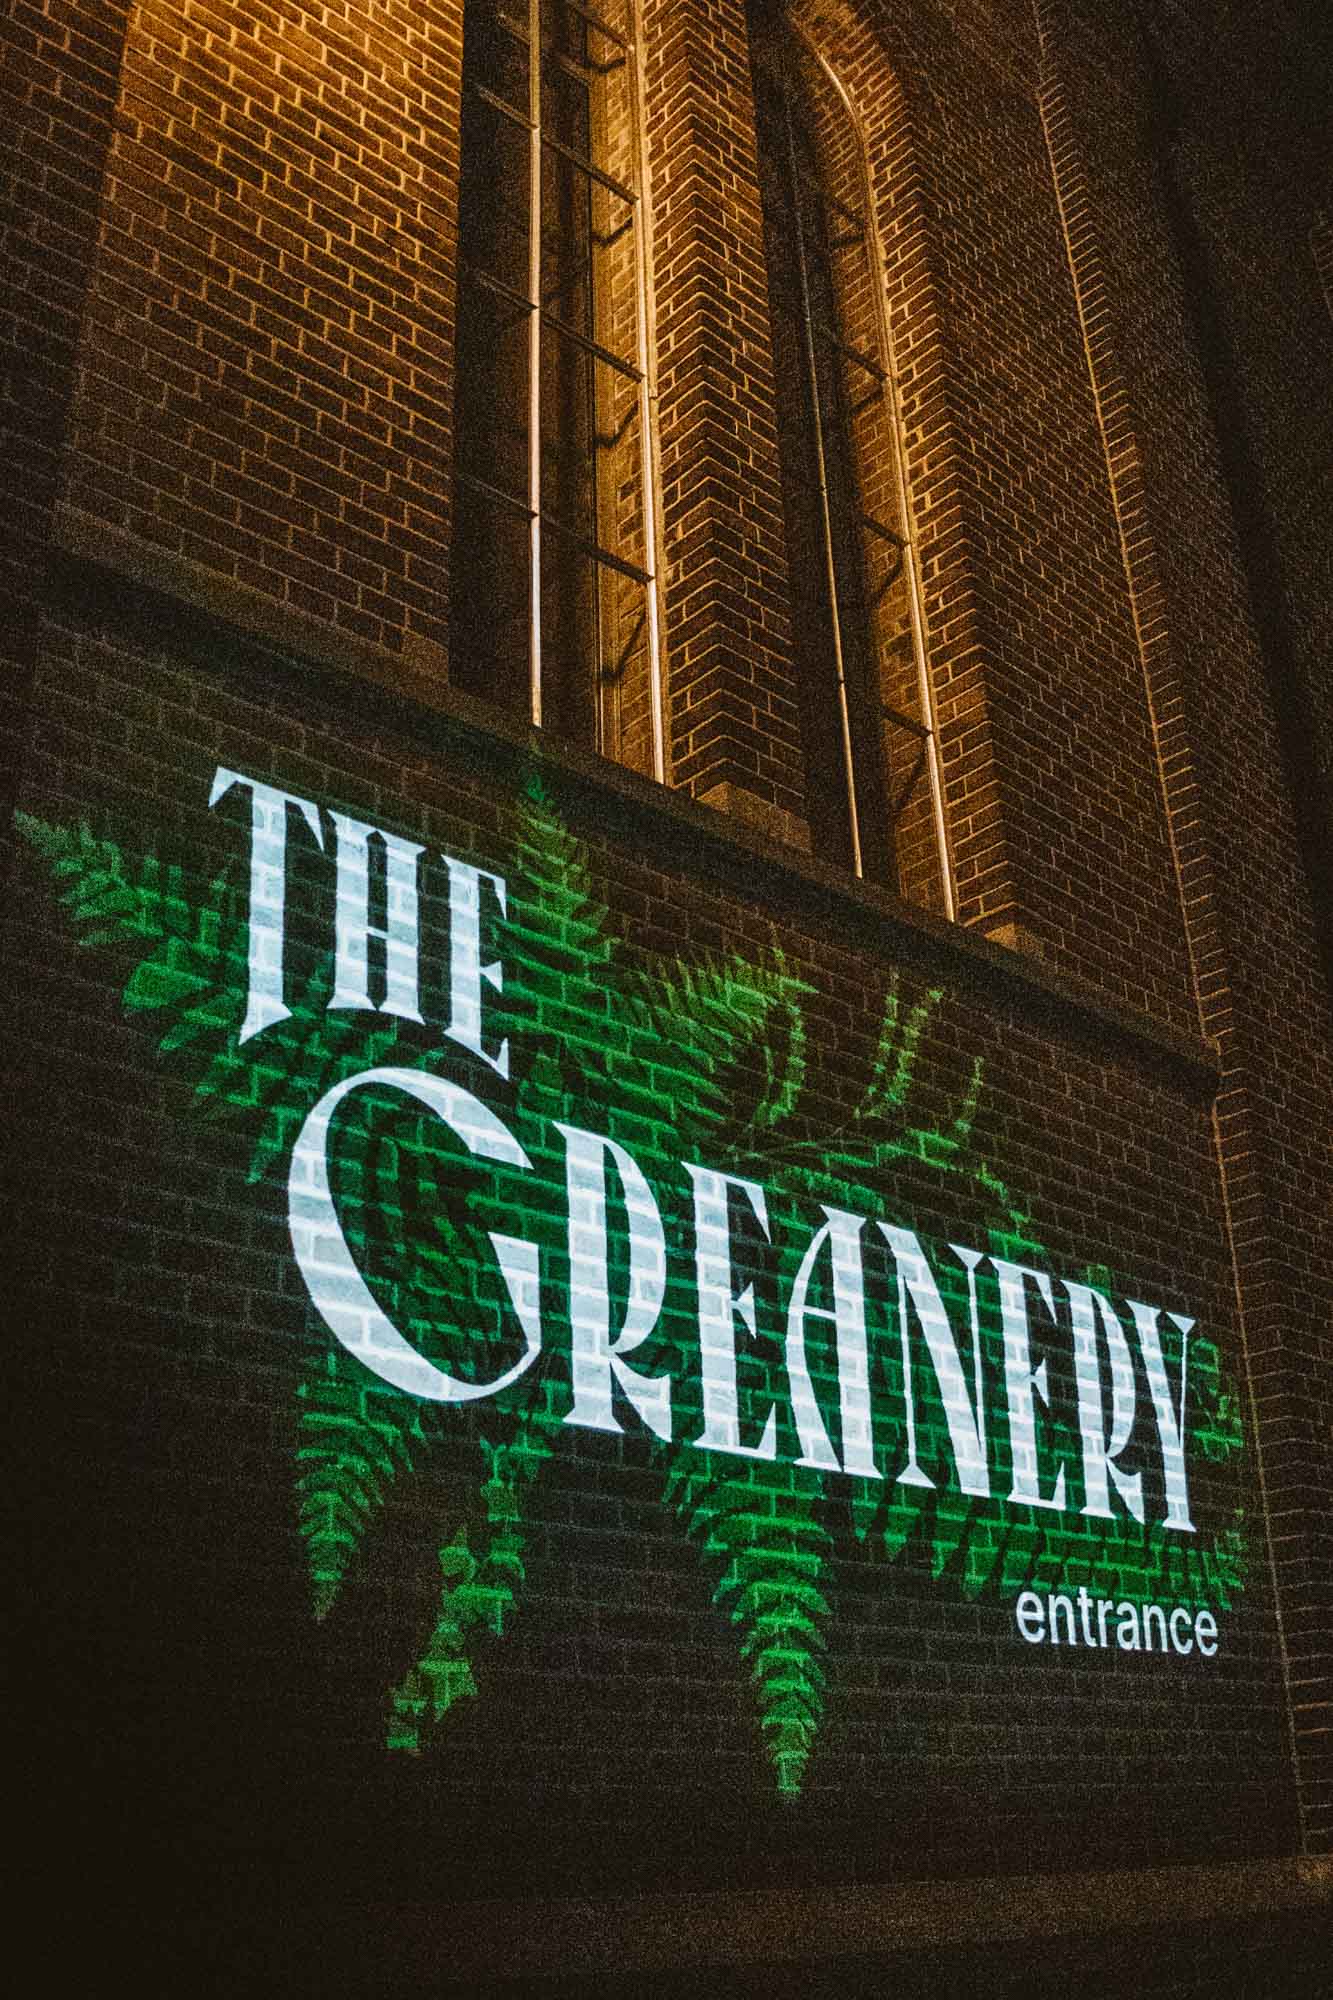 The Greanery diner Amsterdam